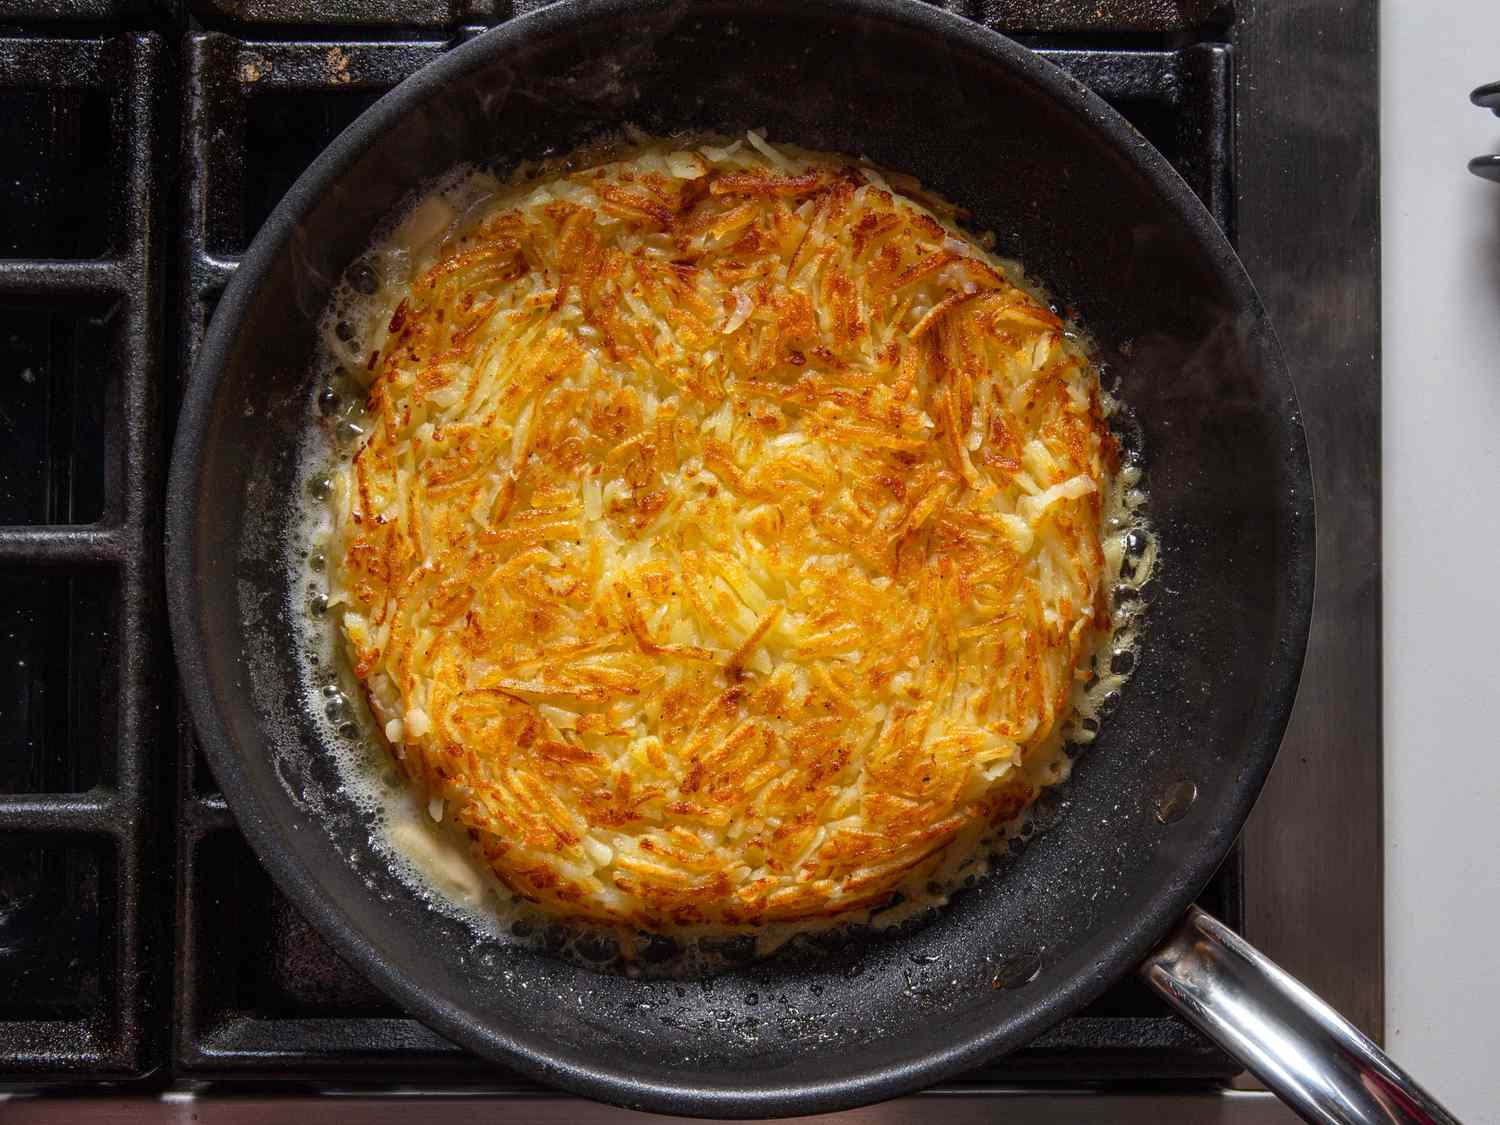 Cooking the rÃ¶sti in the skillet until the second side is browned and crisped. Foaming butter can be seen around its periphery.